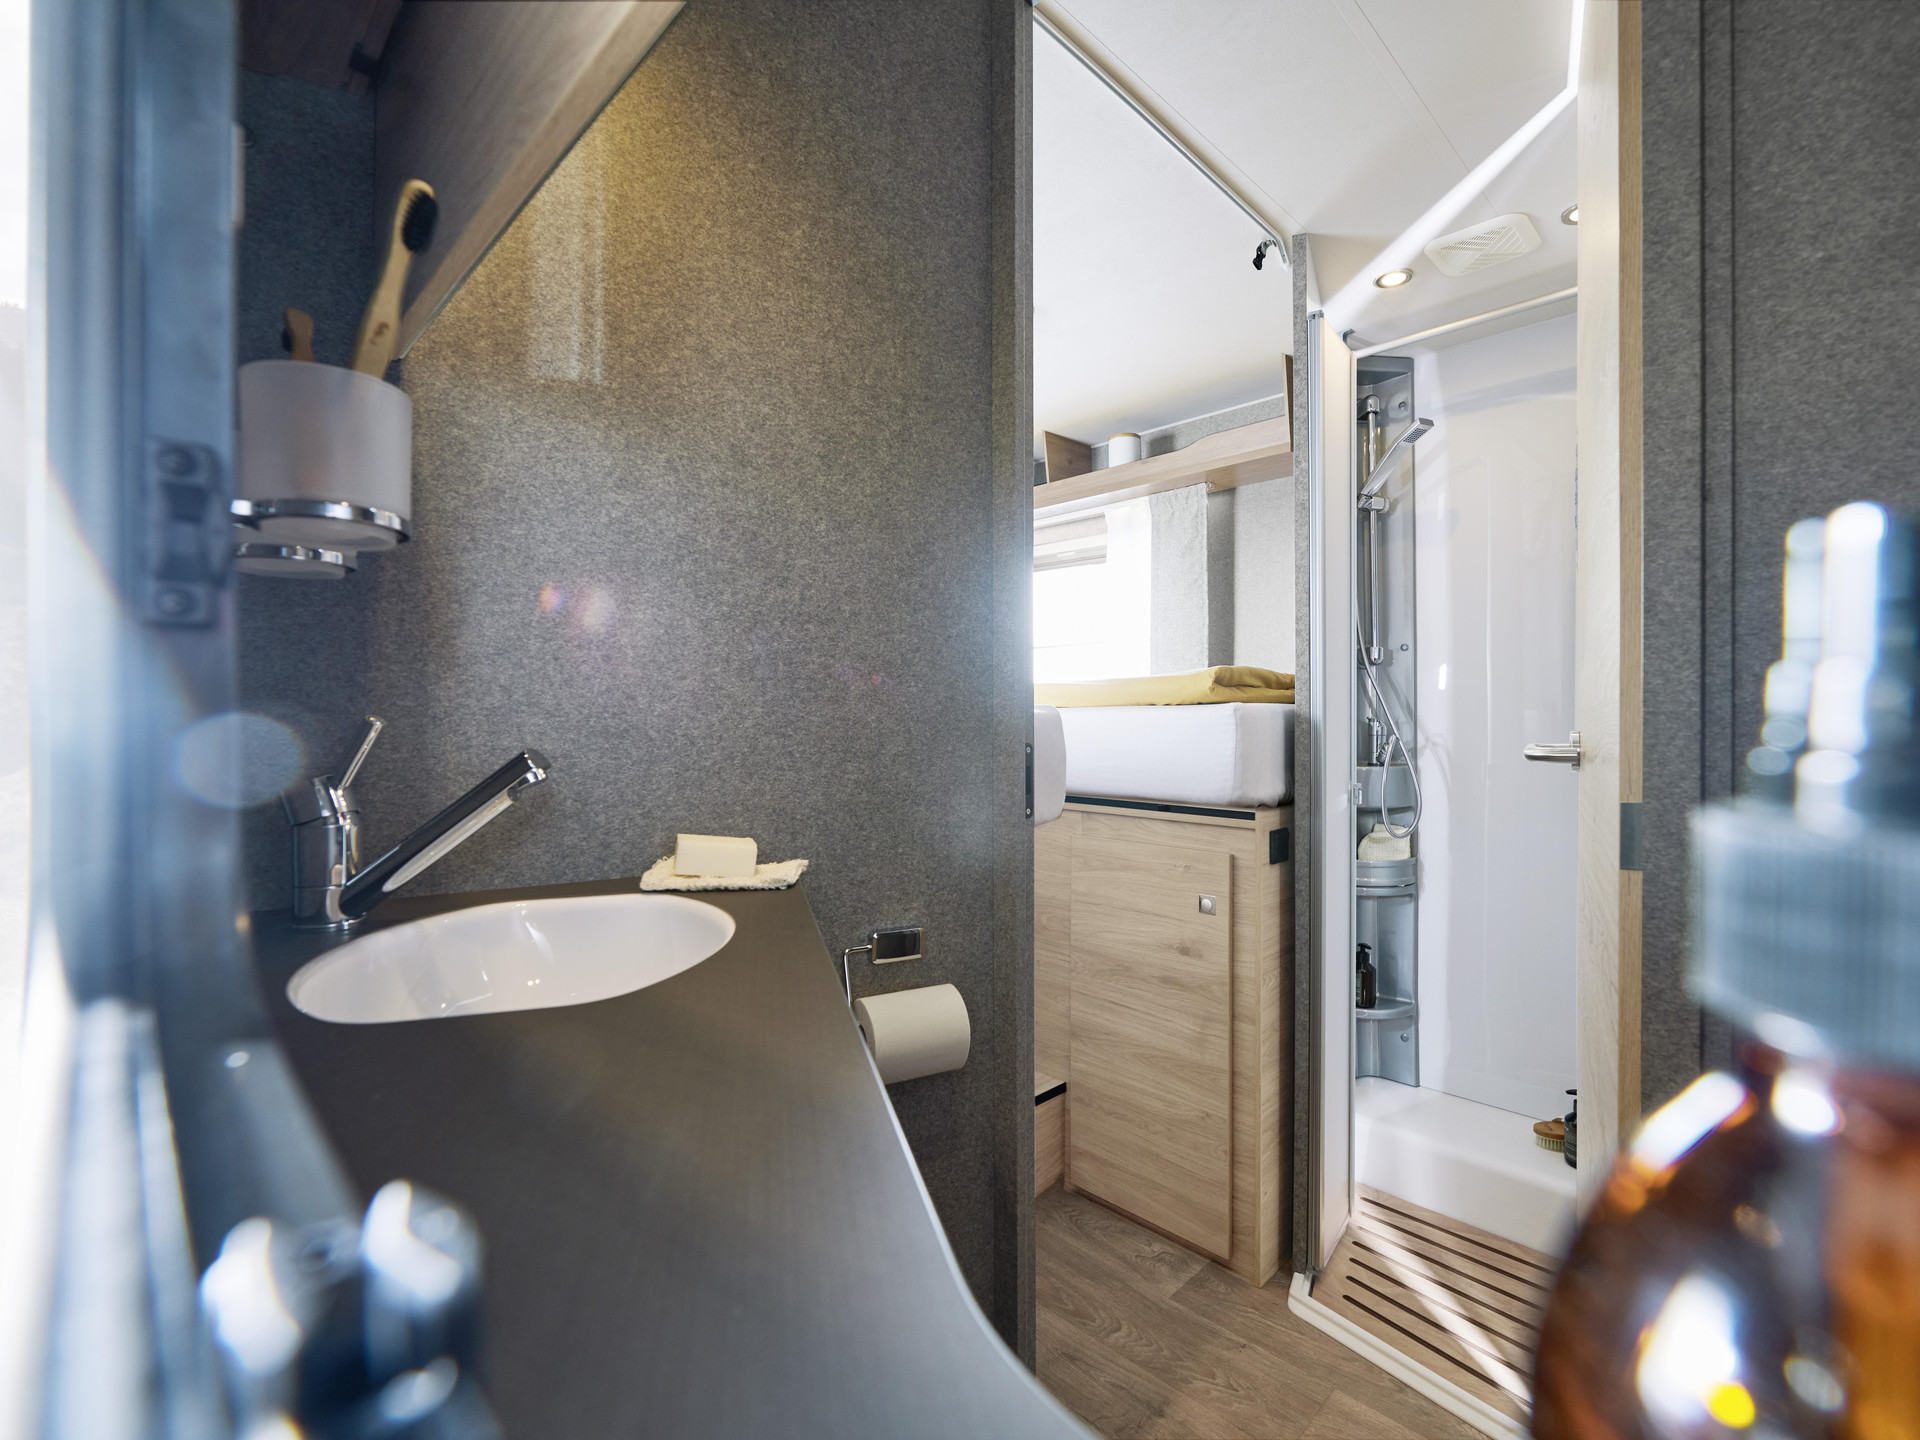 Premium materials and workmanship also lend the bathroom a touch of luxury.